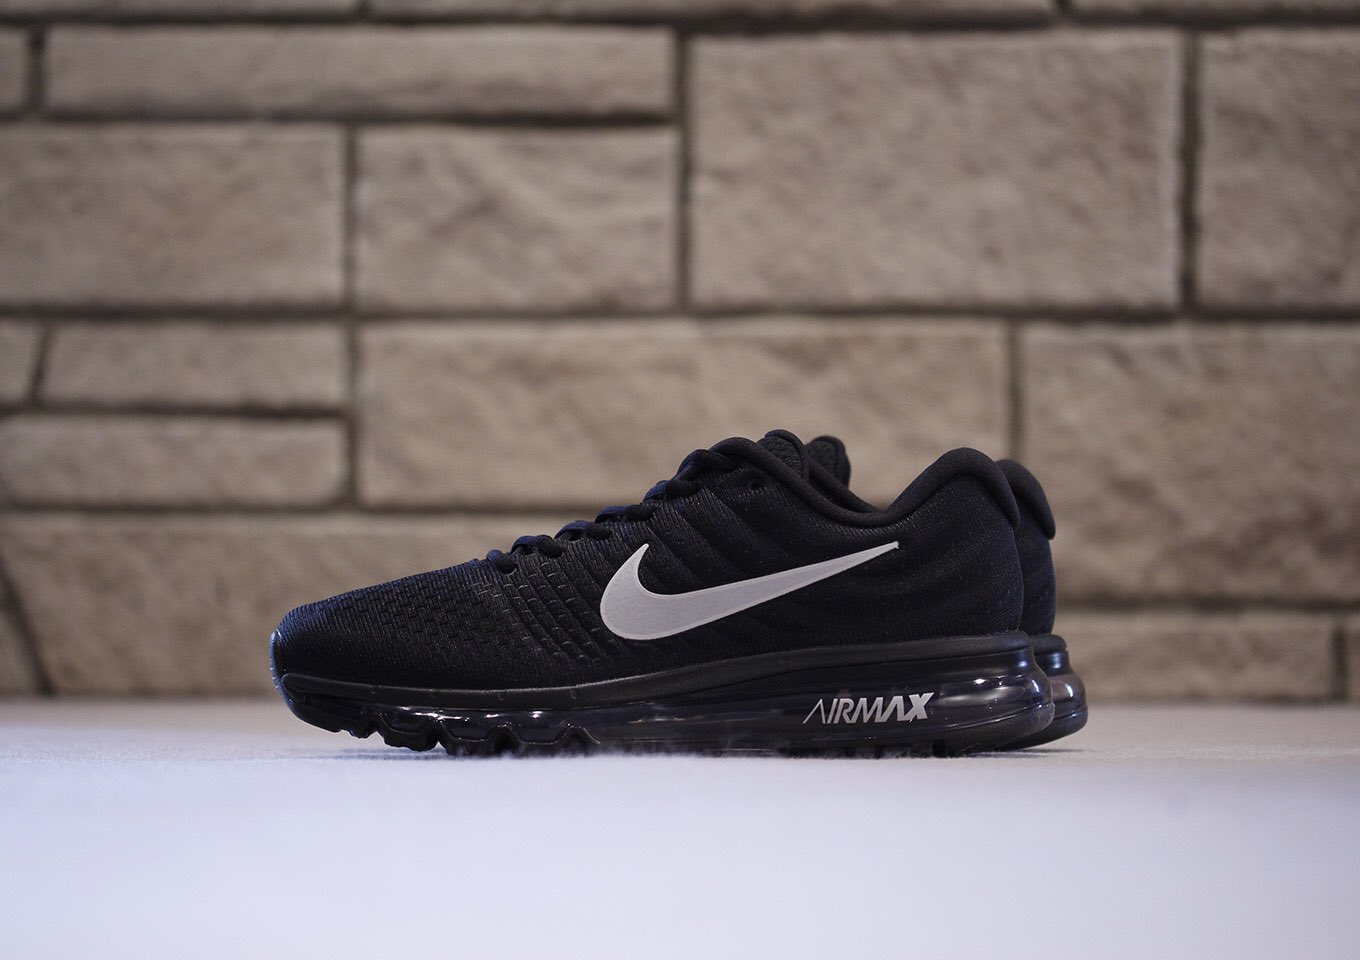 A+S on Twitter: "in stock now 849559-001 NIKE AIR MAX 2017  ¥21,000(+TAX)26.0-29.0 #a_and_s #nike #airmax2017 https://t.co/4F5W94V88T"  / Twitter